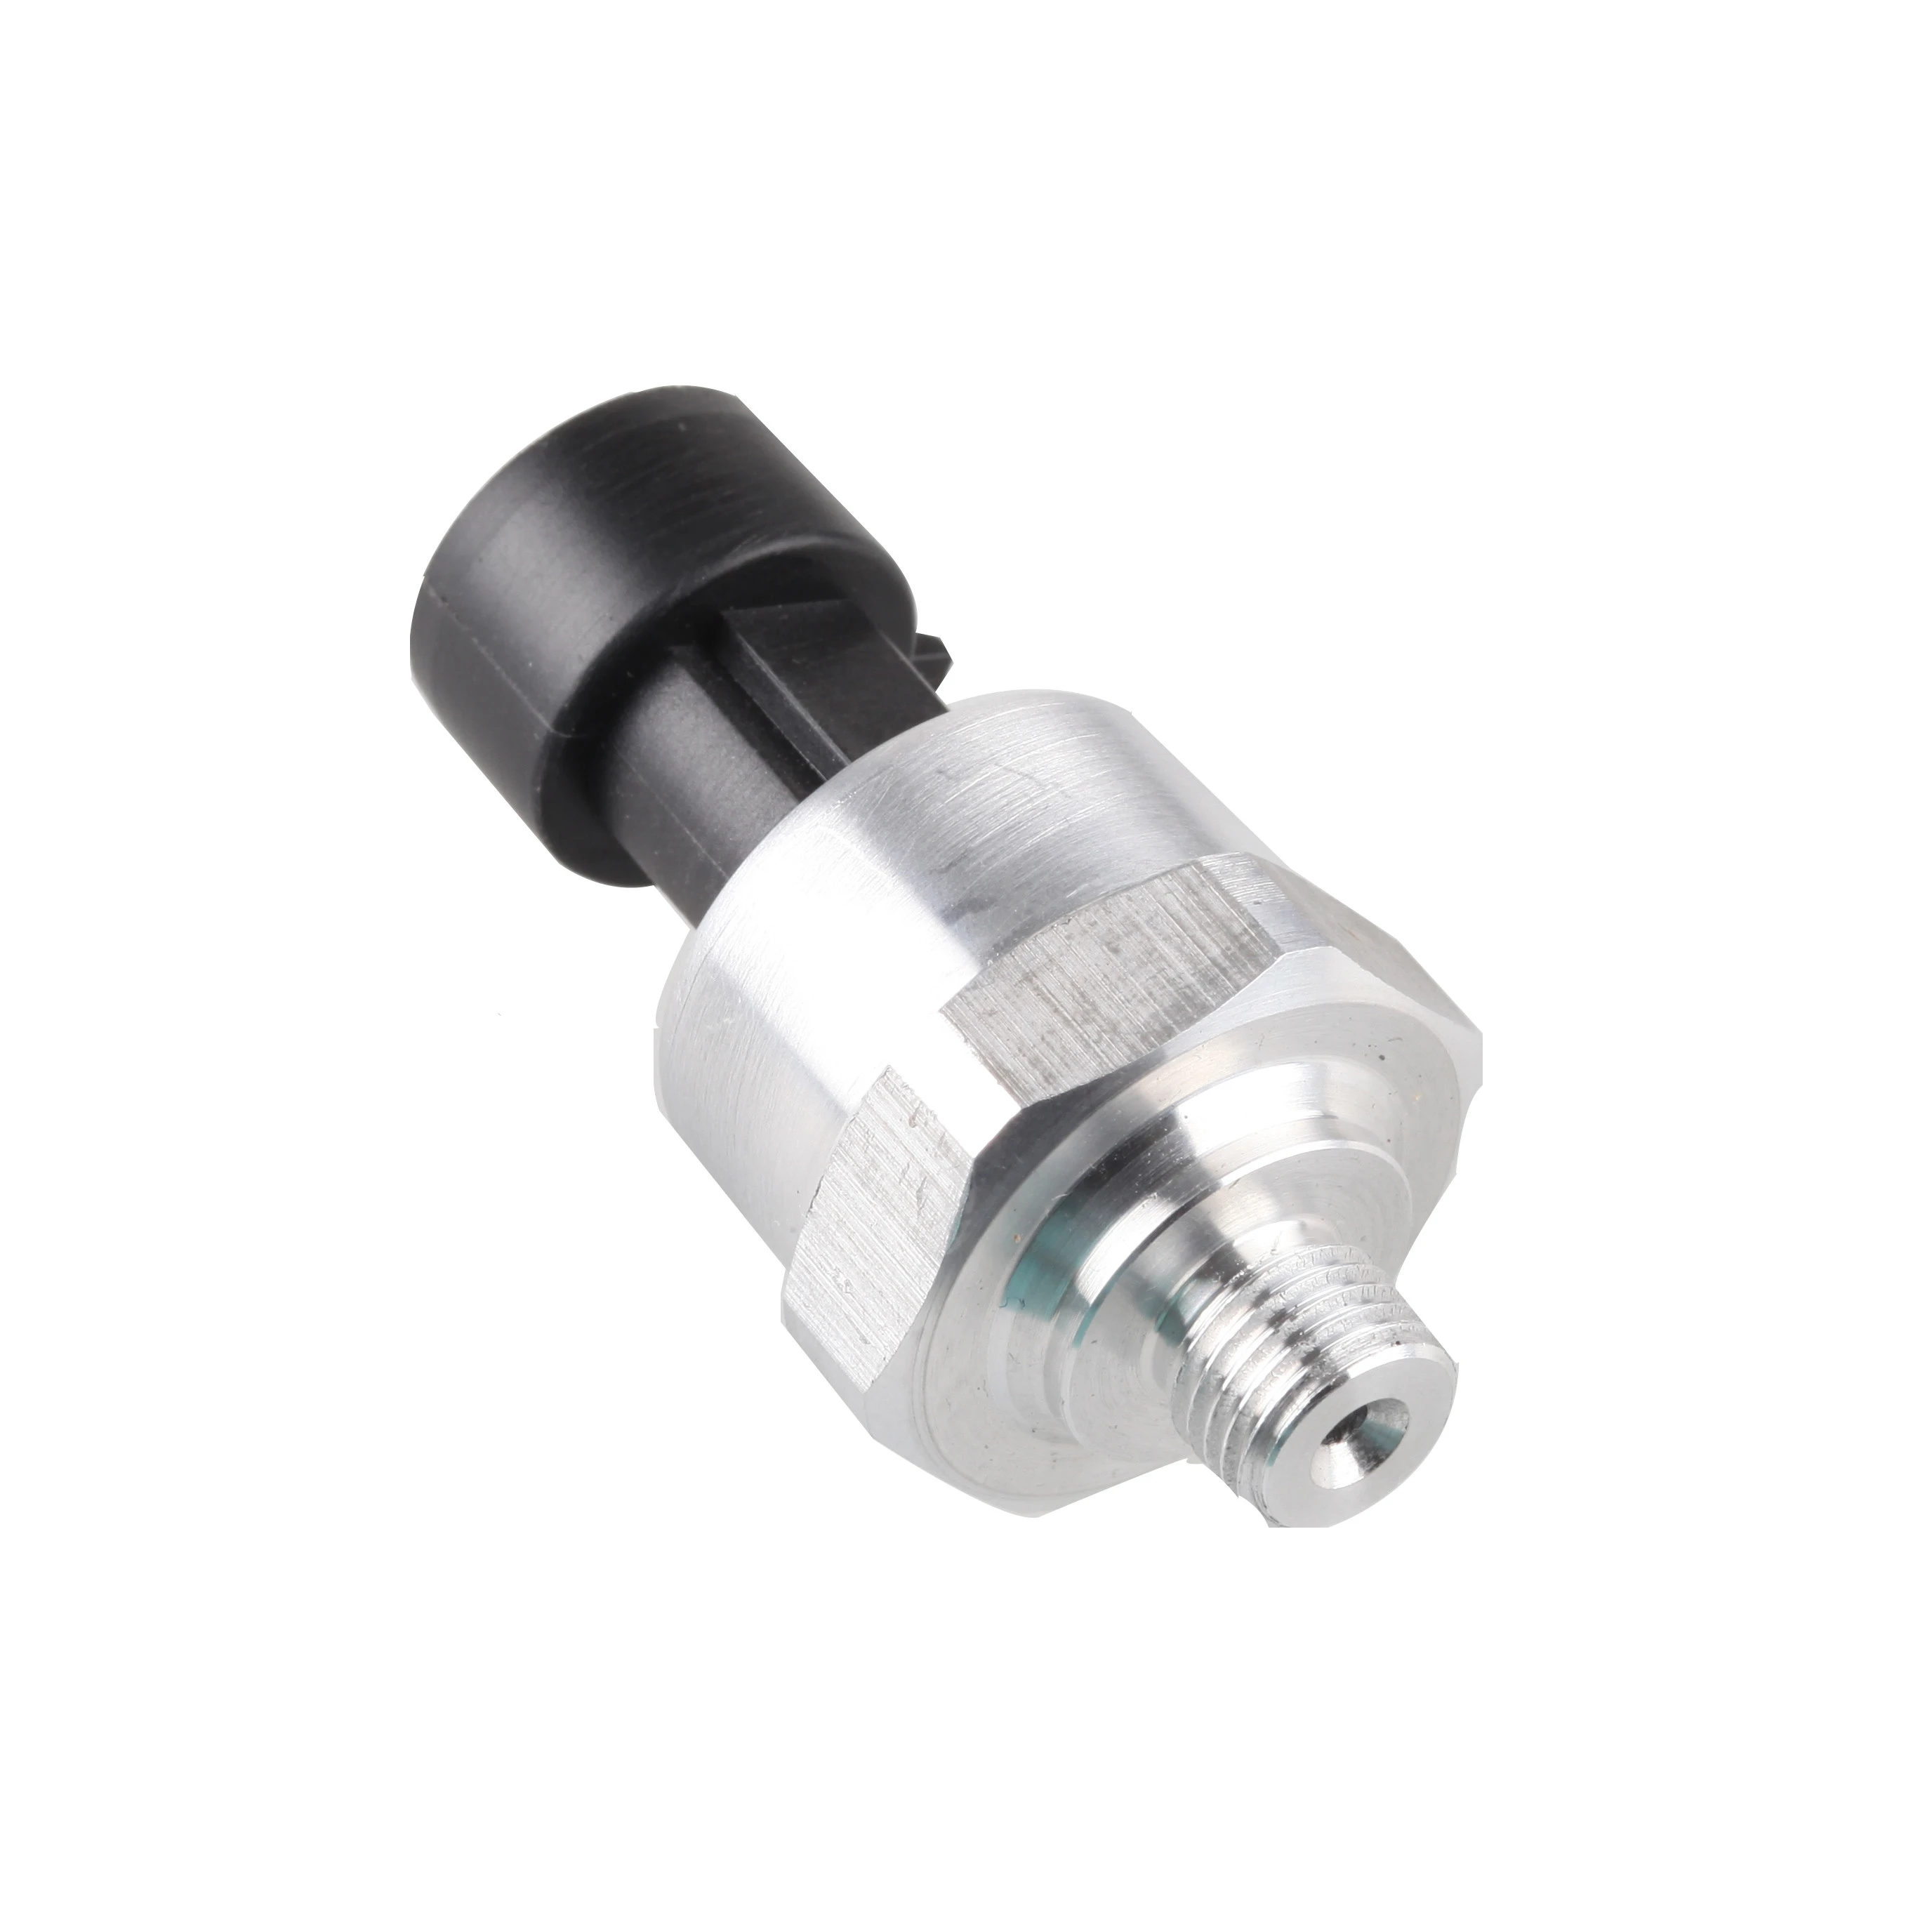 0-4.5v G1/4 Universe Standard Pressure Differential Transducers Transmitters Pressure Good Quality!